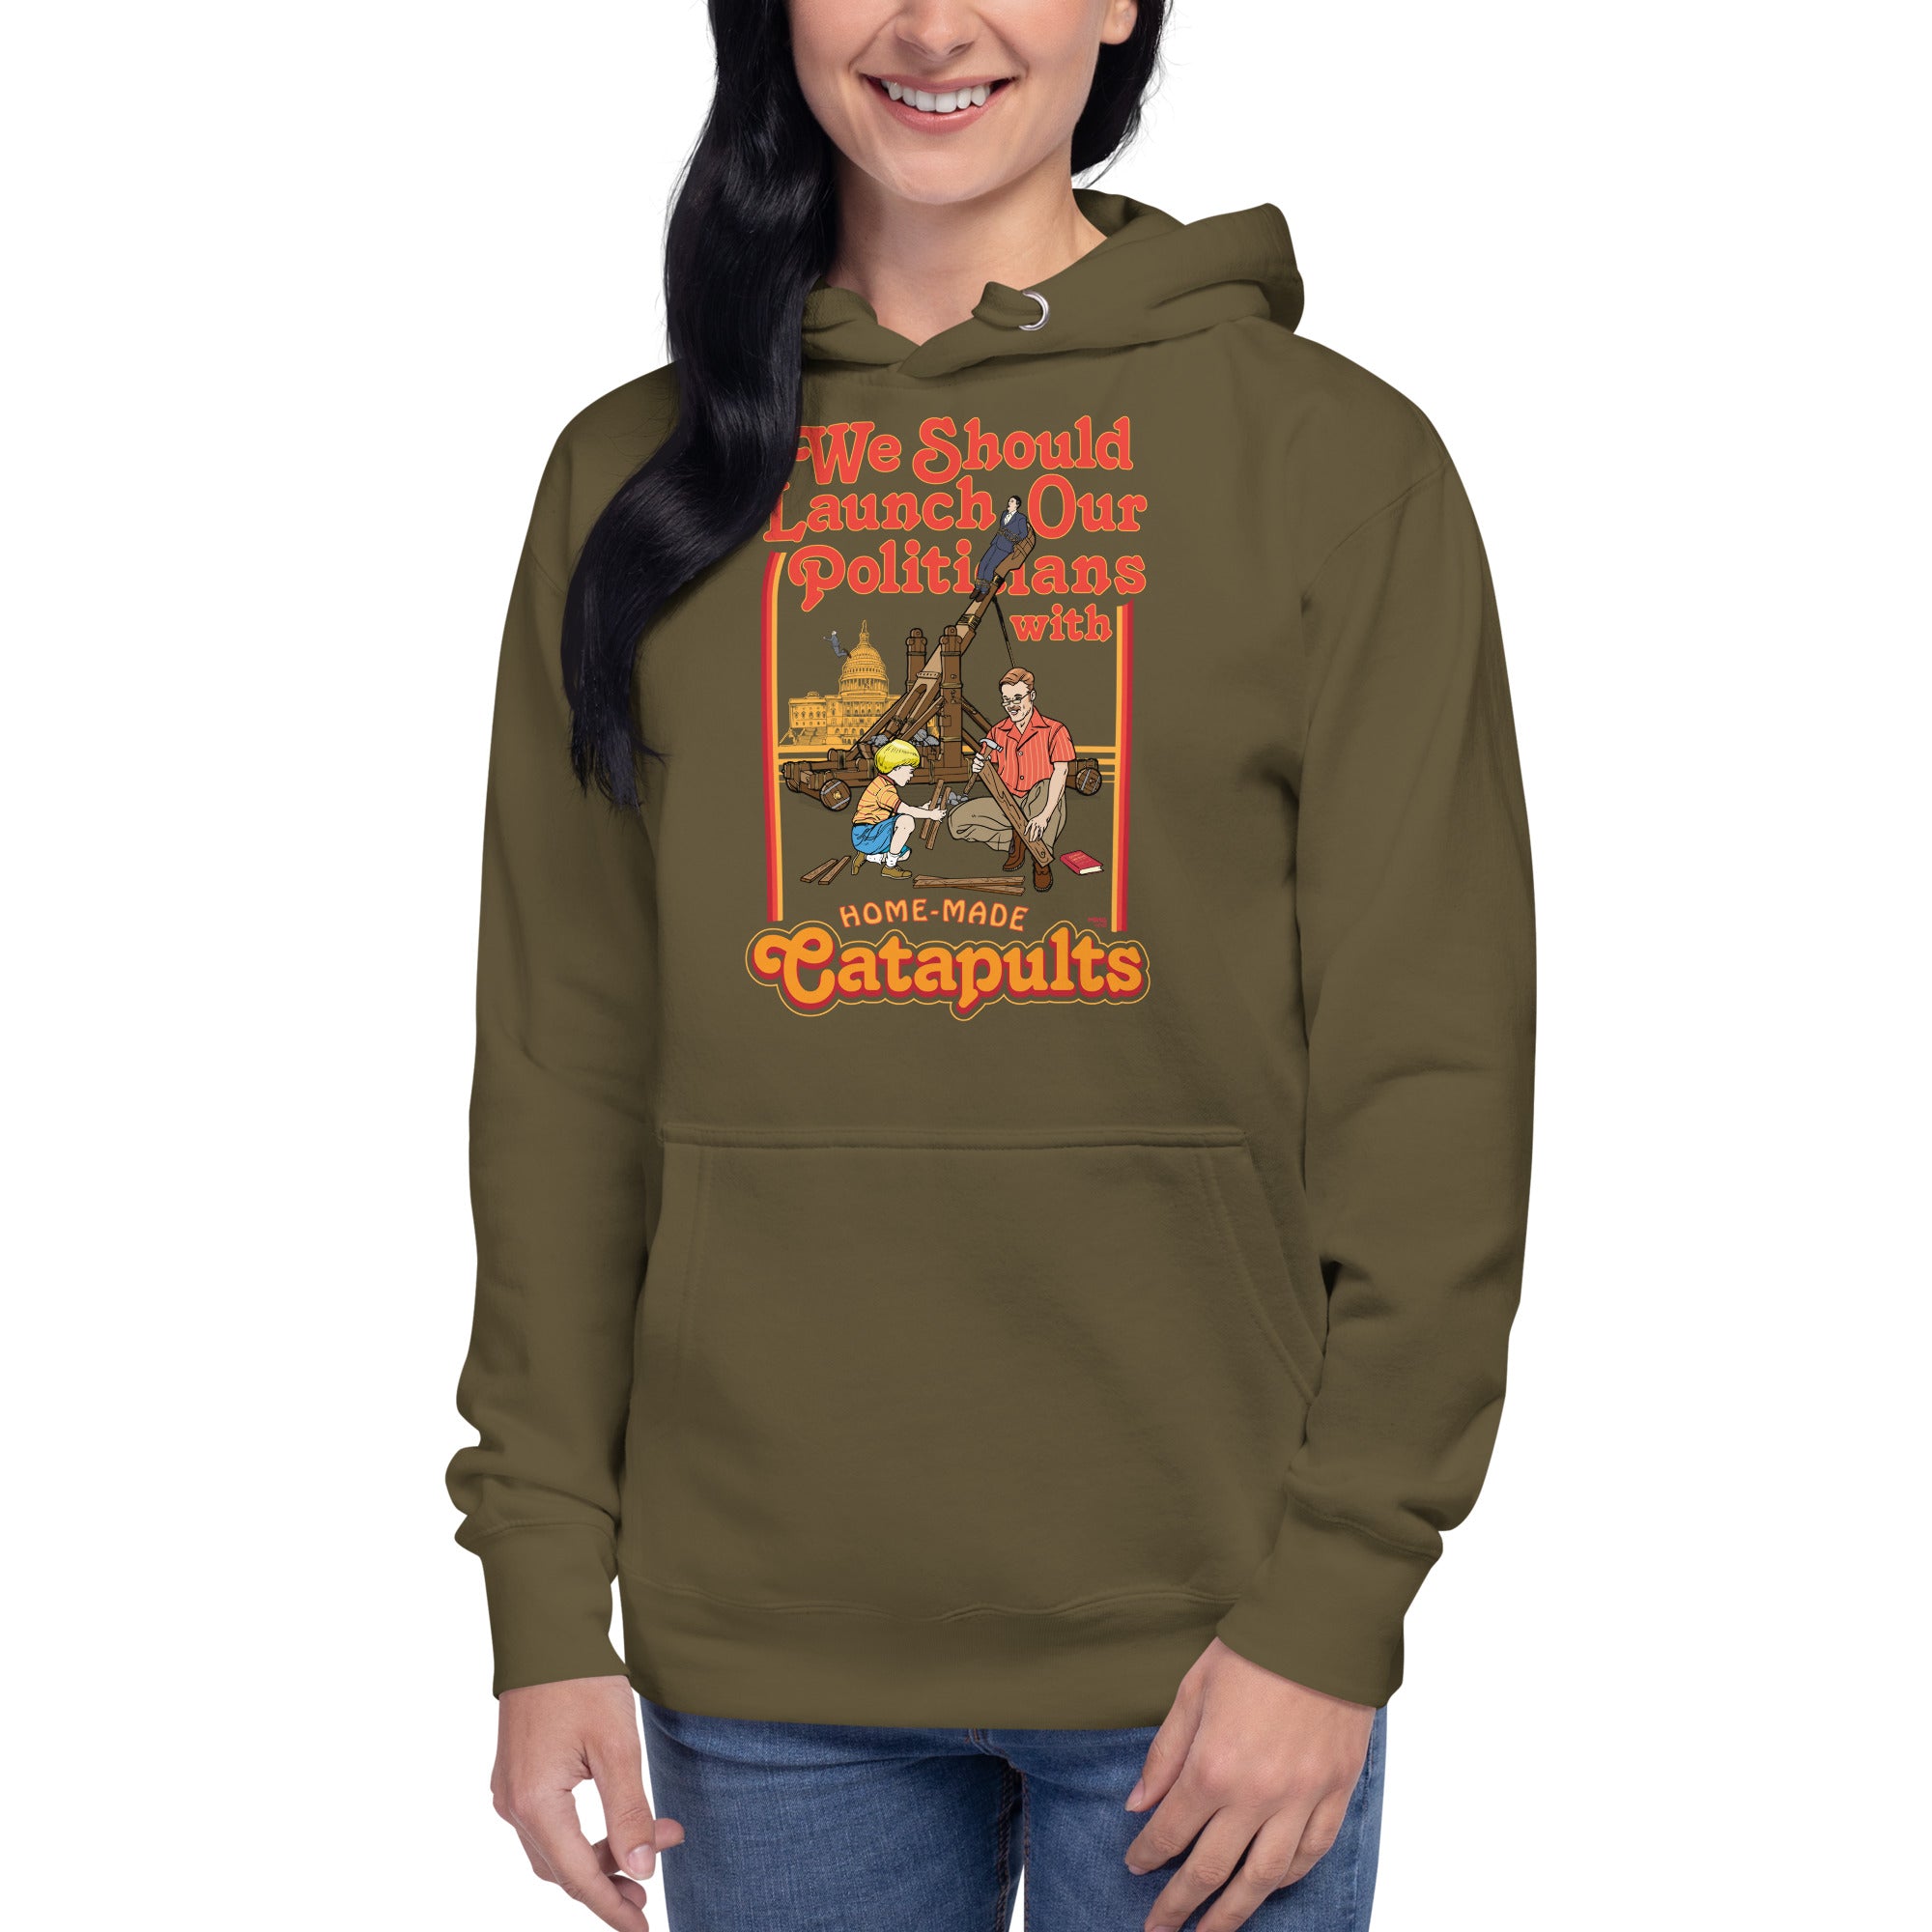 We Should Launch Our Politicians with Homemade Catapults Unisex Hoodie